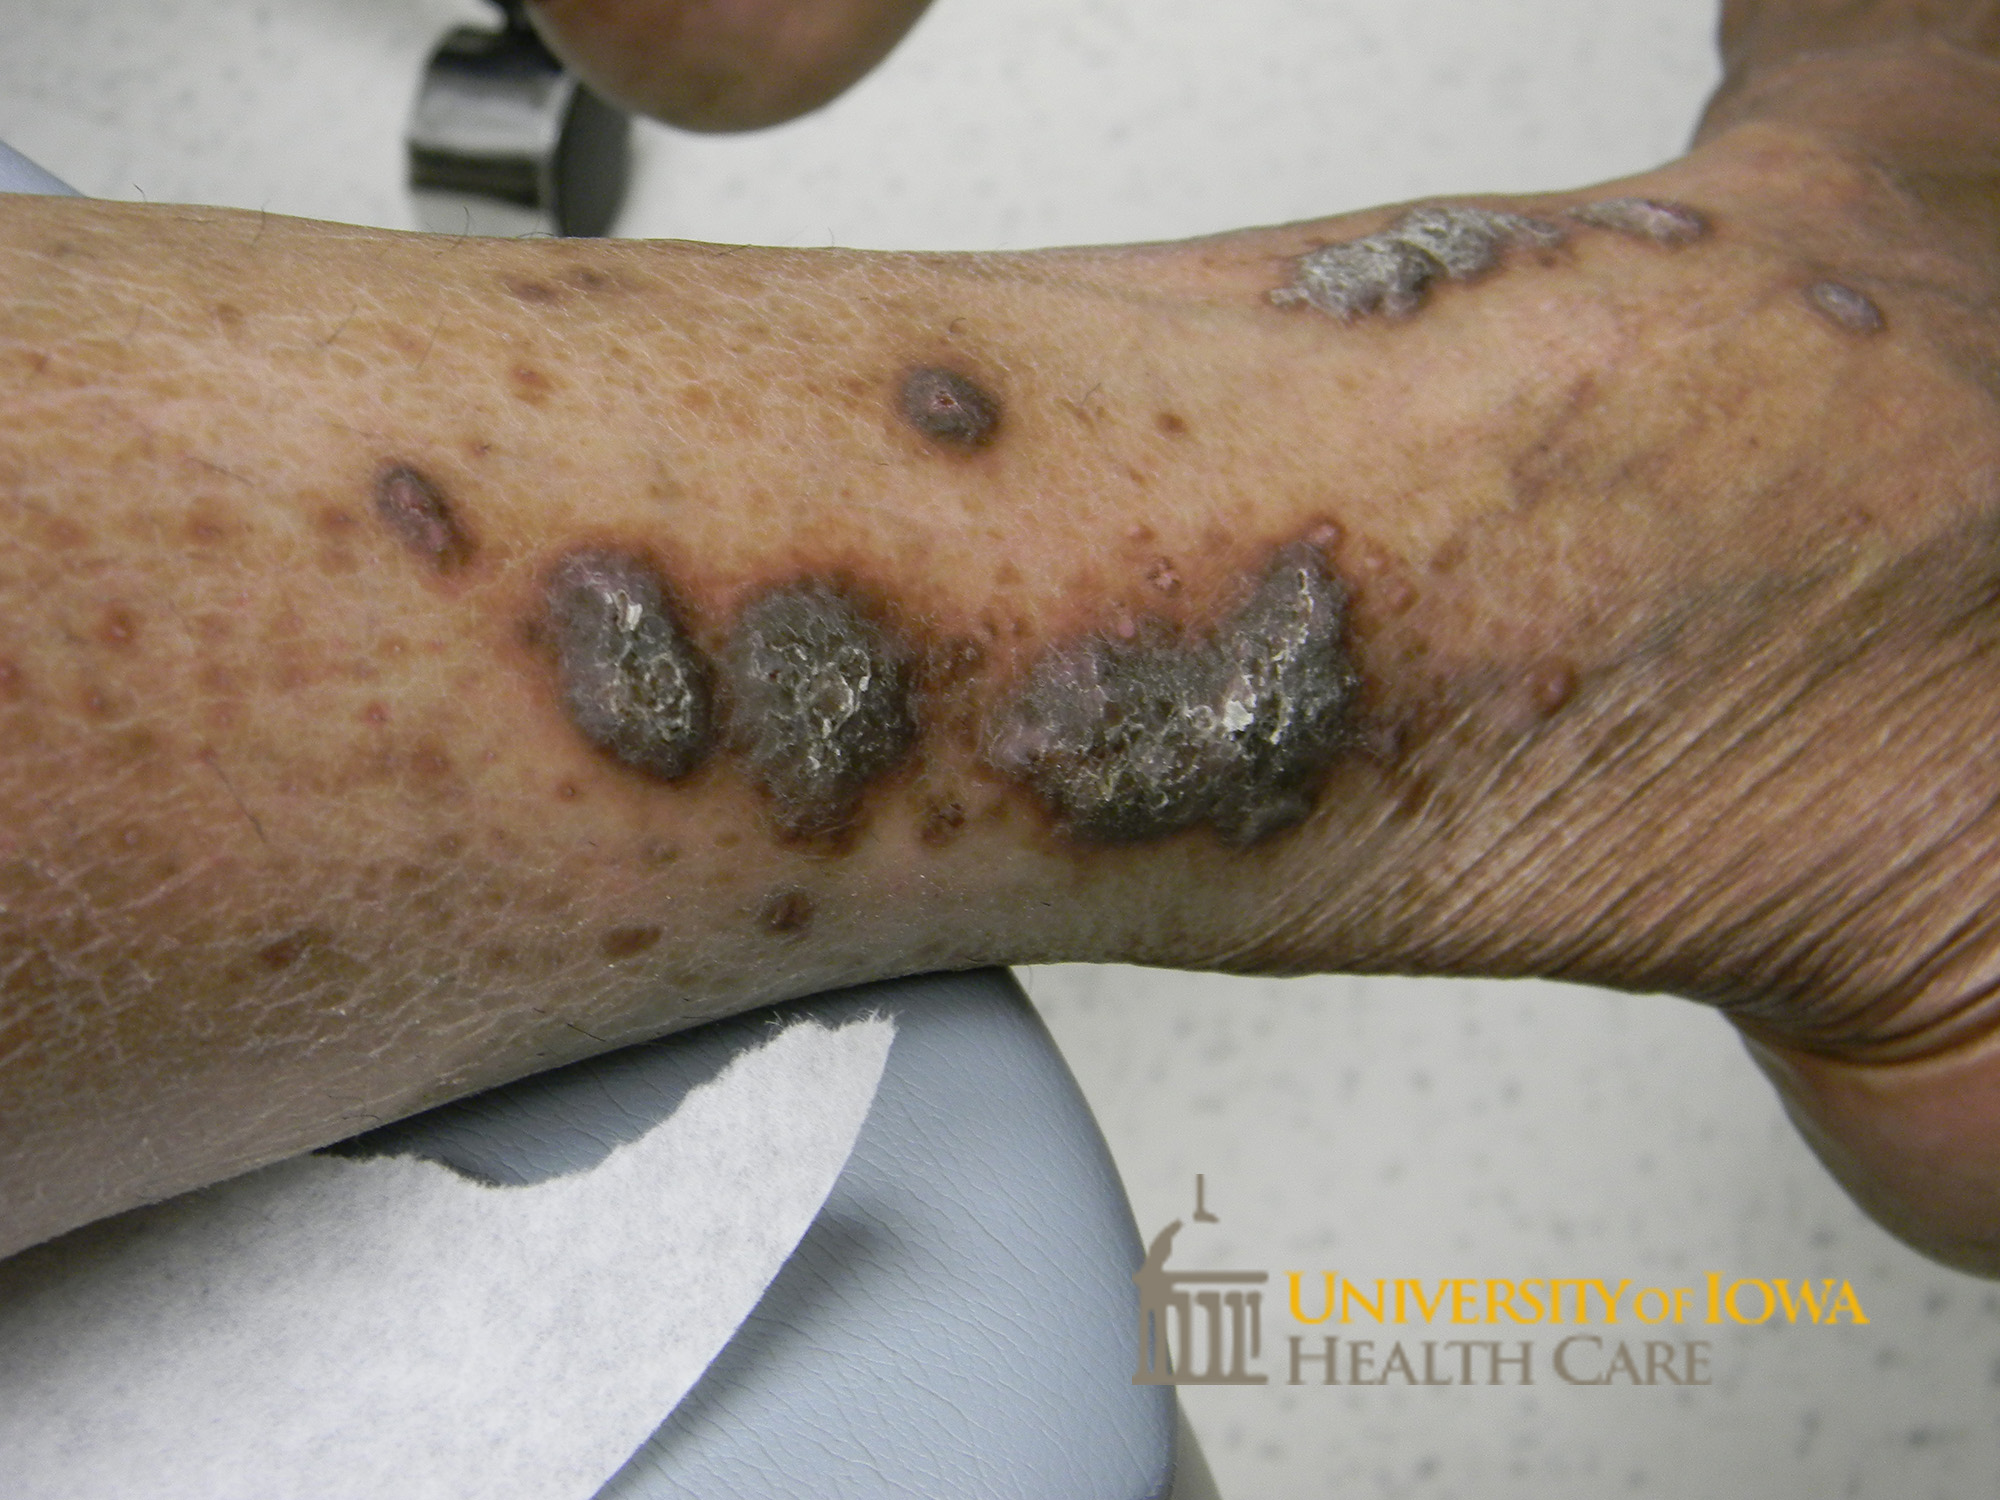 Thick hyperpigmented to violaceous polygonal papules and plaques with scale on the lower extremity. (click images for higher resolution).